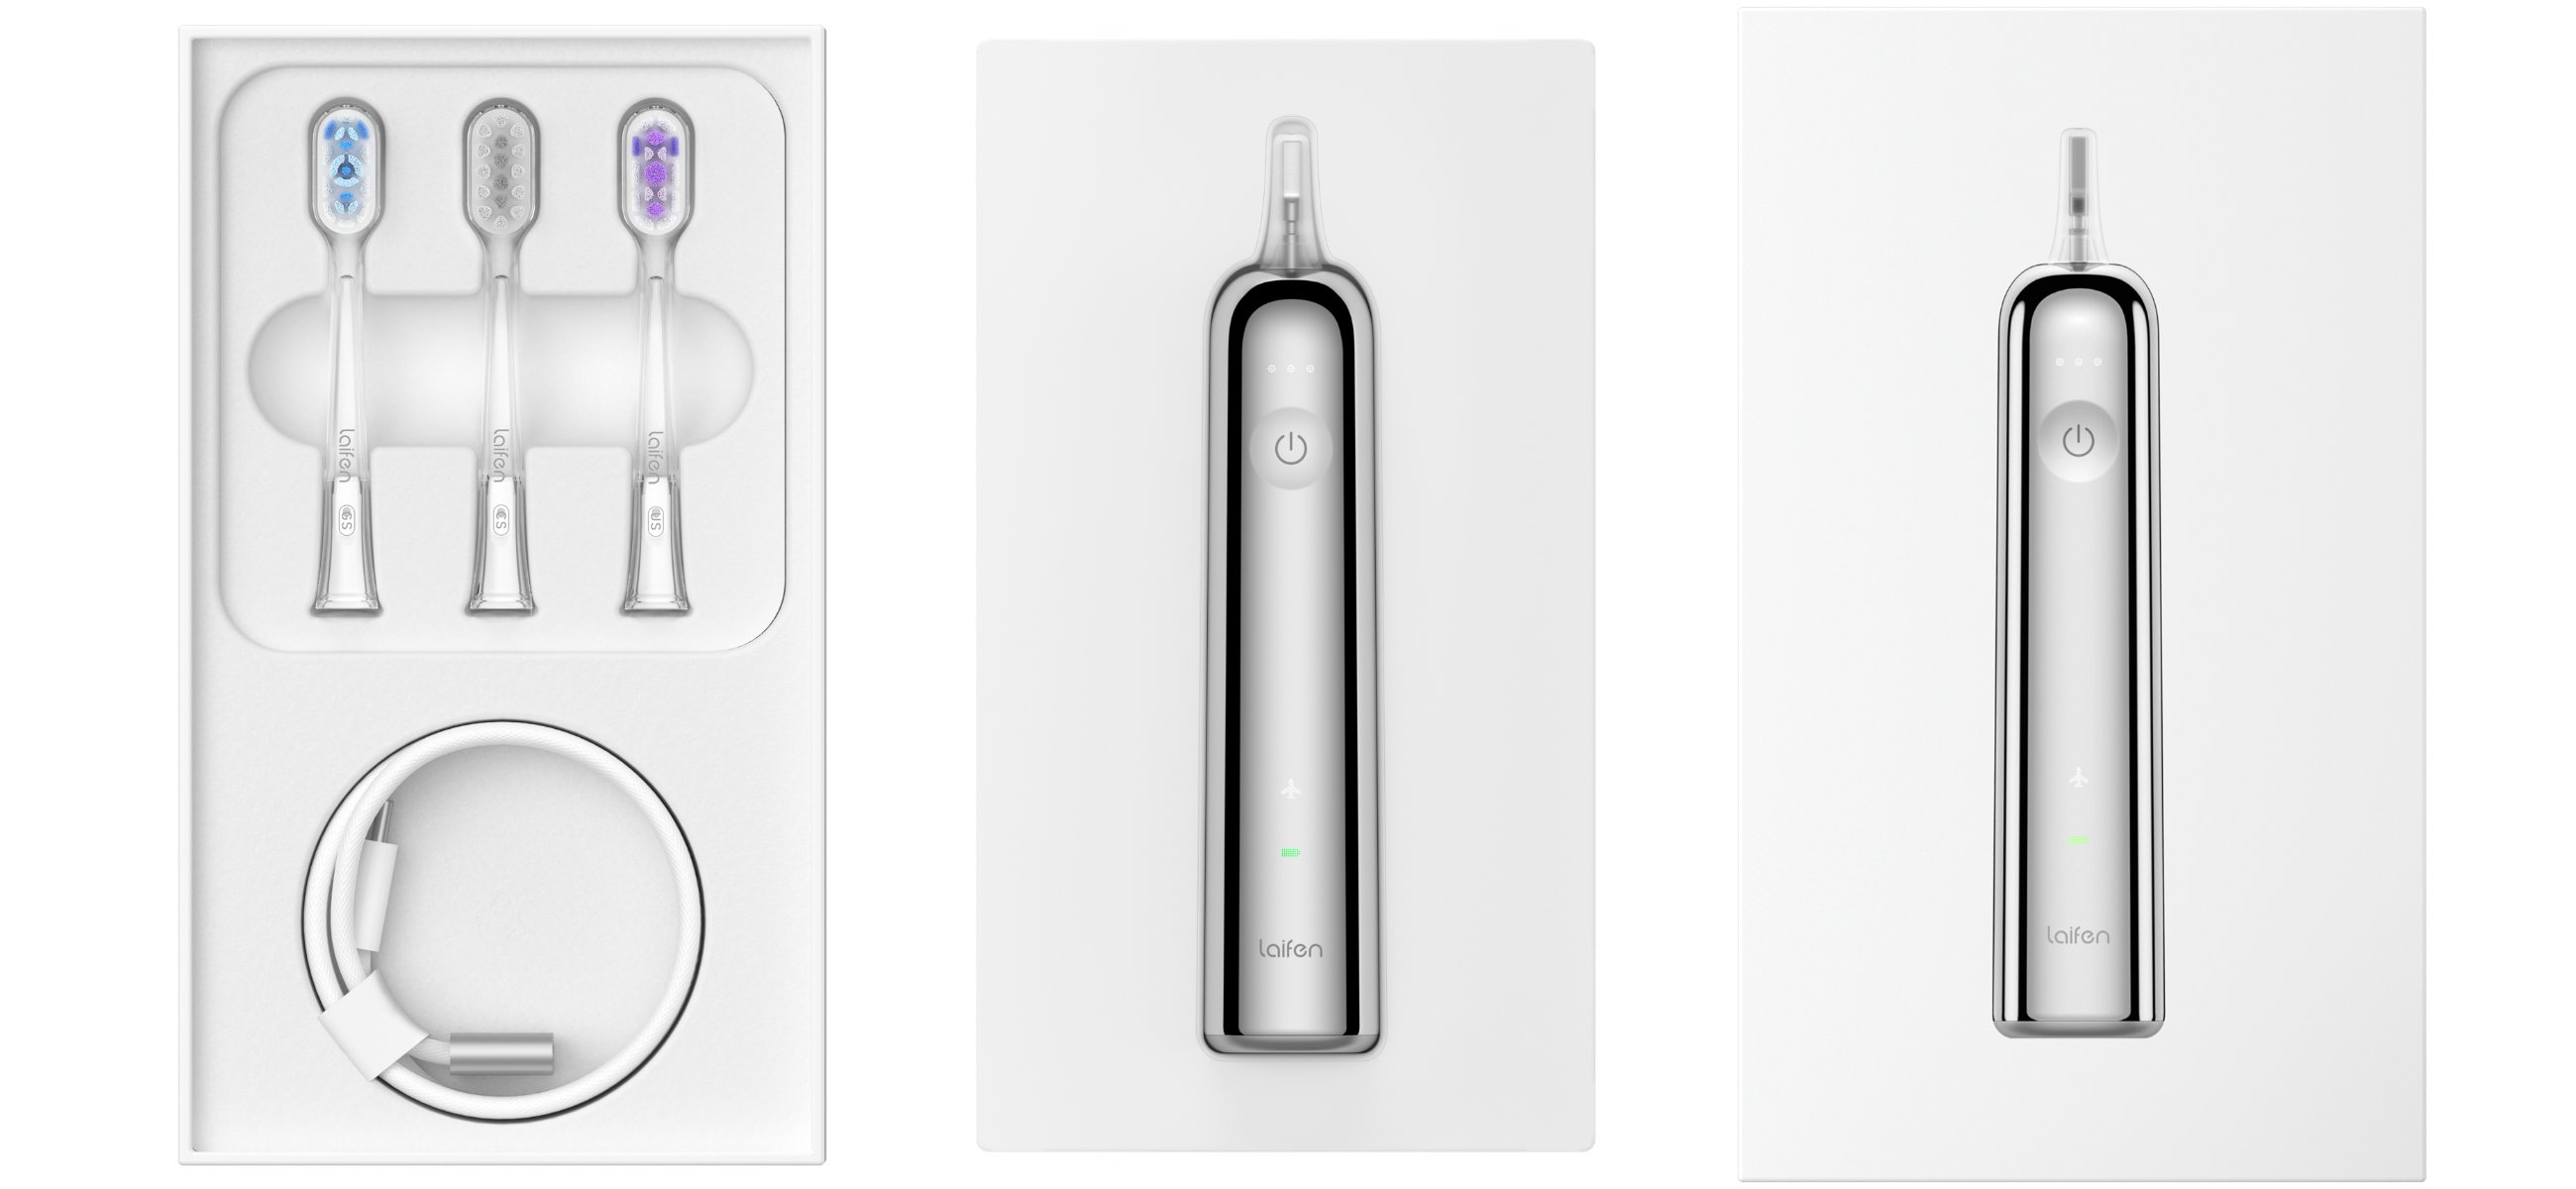 Find and buy your best rechargeable electric toothbrush